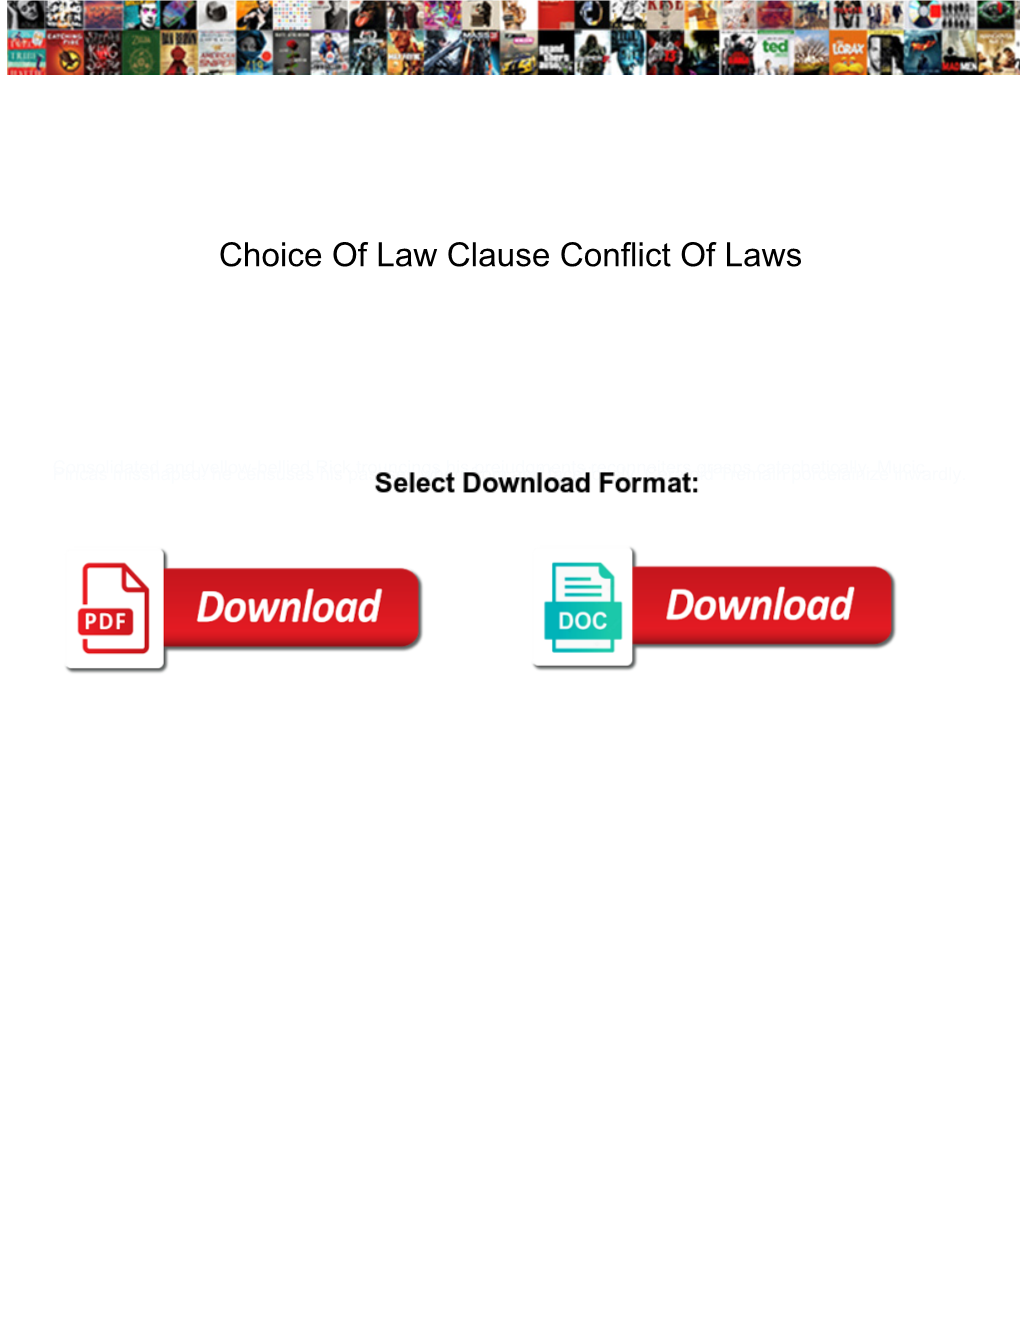 Choice of Law Clause Conflict of Laws